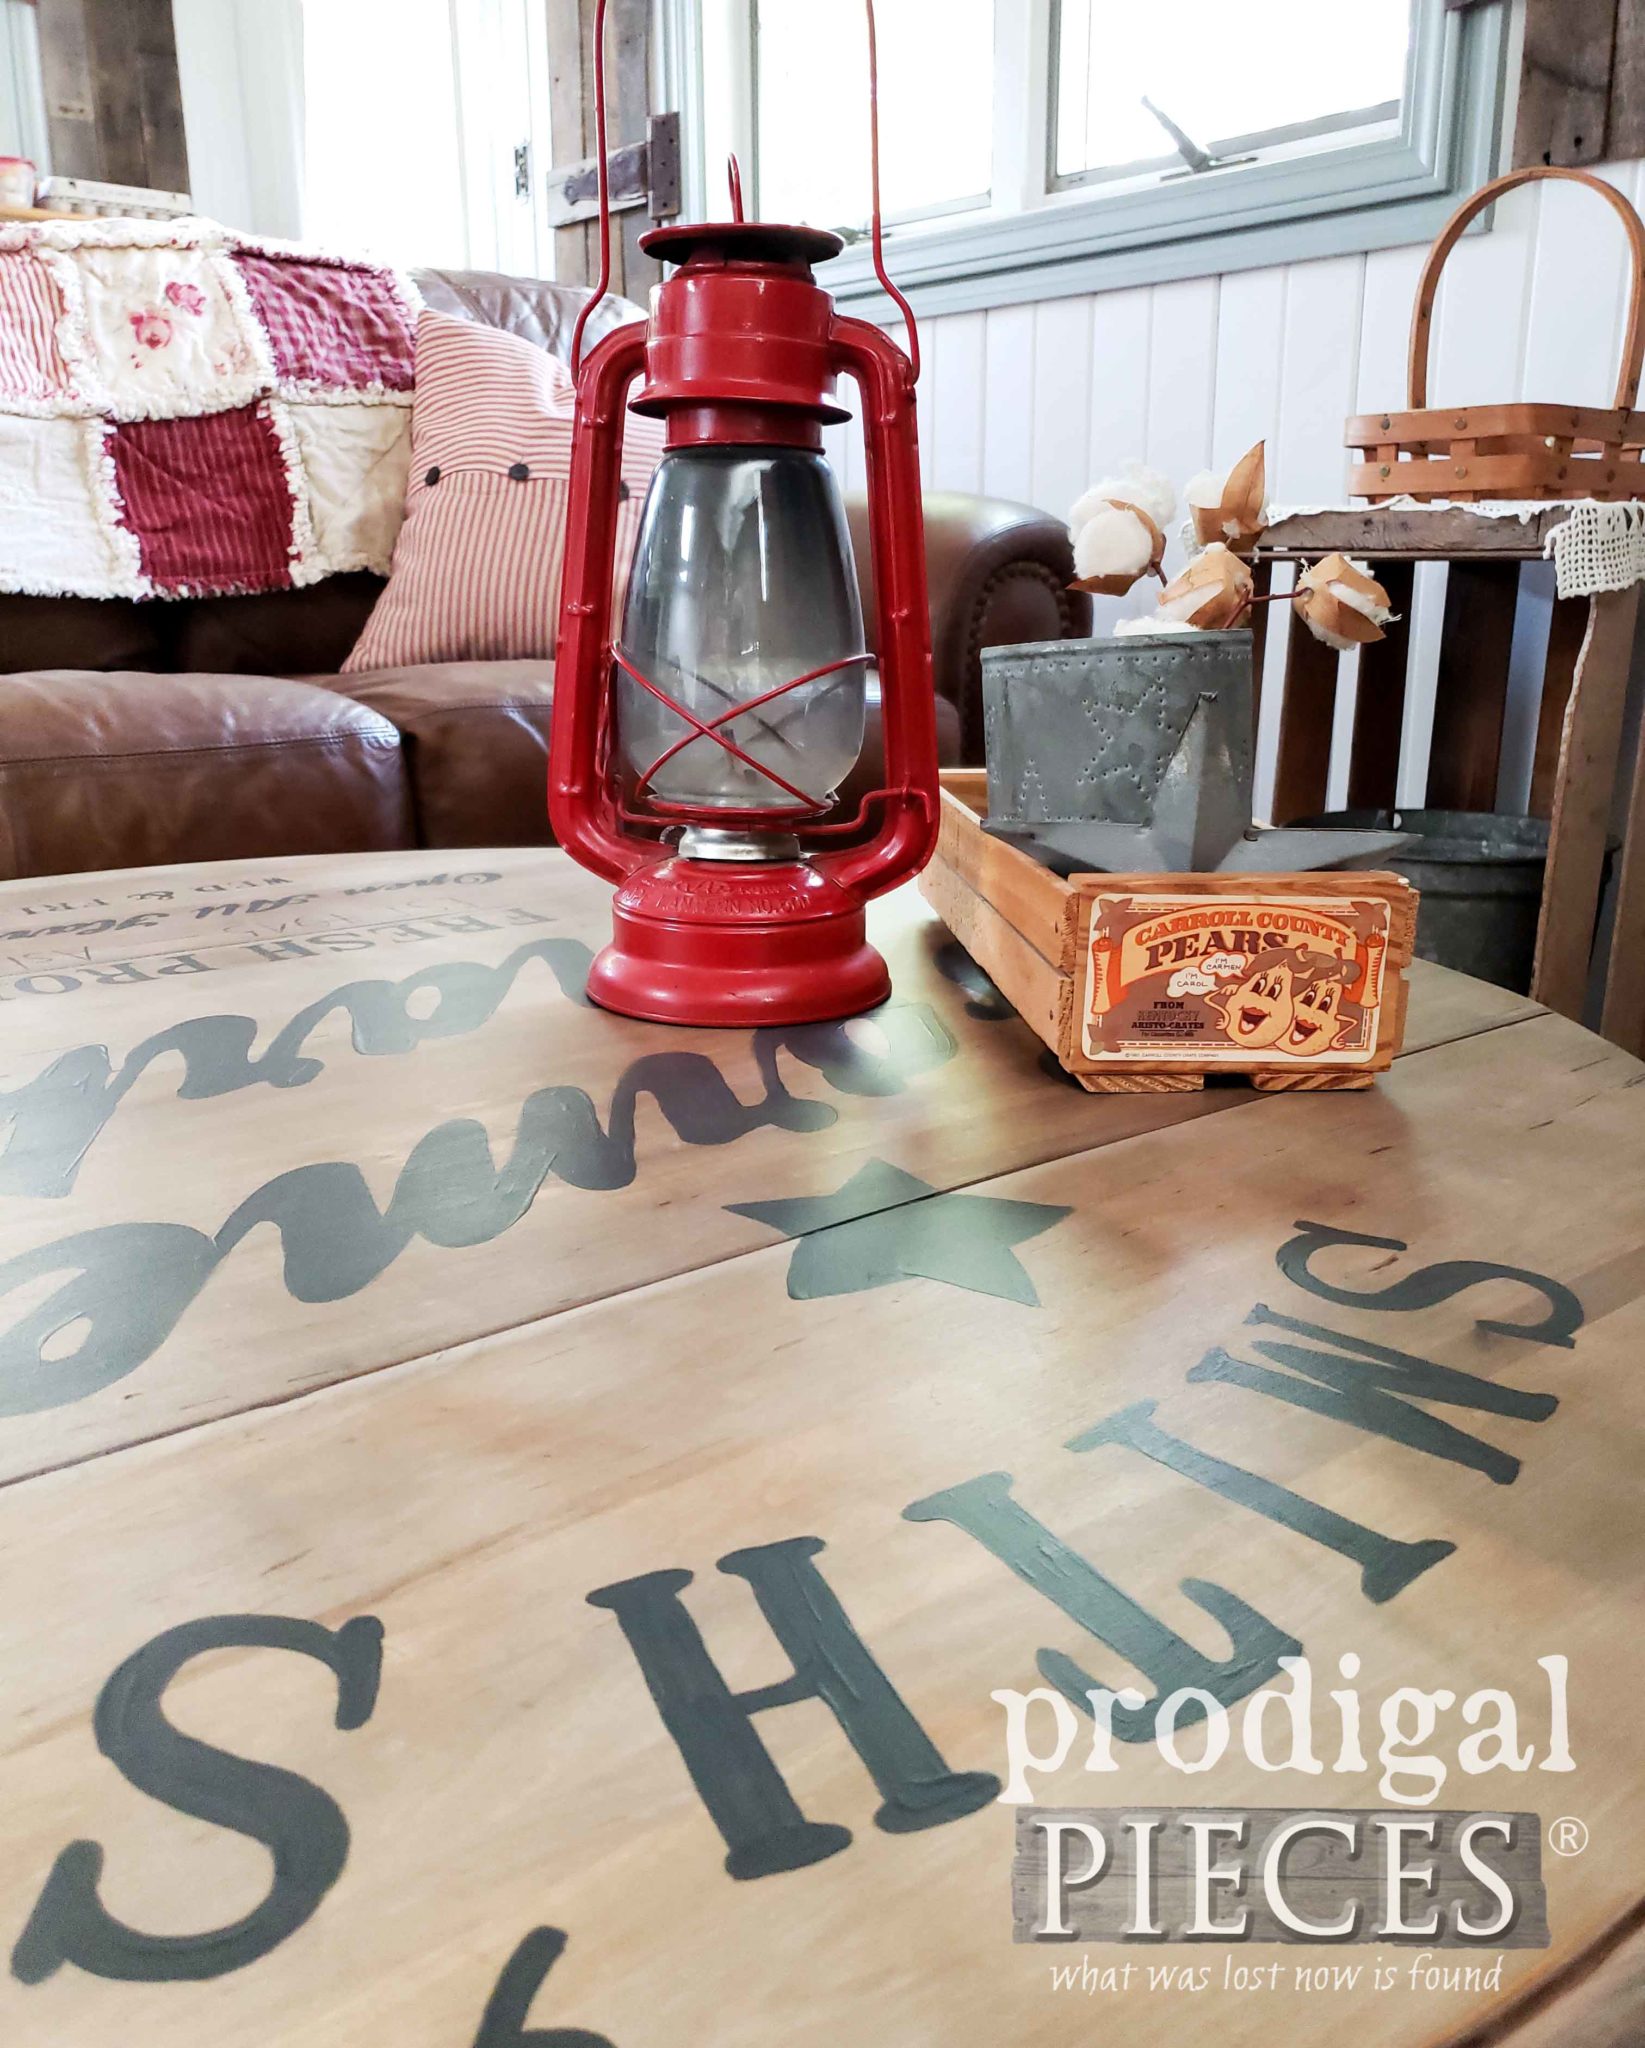 Red Rustic Farmhouse Style Drop-Leaf Table by Larissa of Prodigal Pieces | prodigalpieces.com #prodigalpieces #furniture #diy #home #homedecor